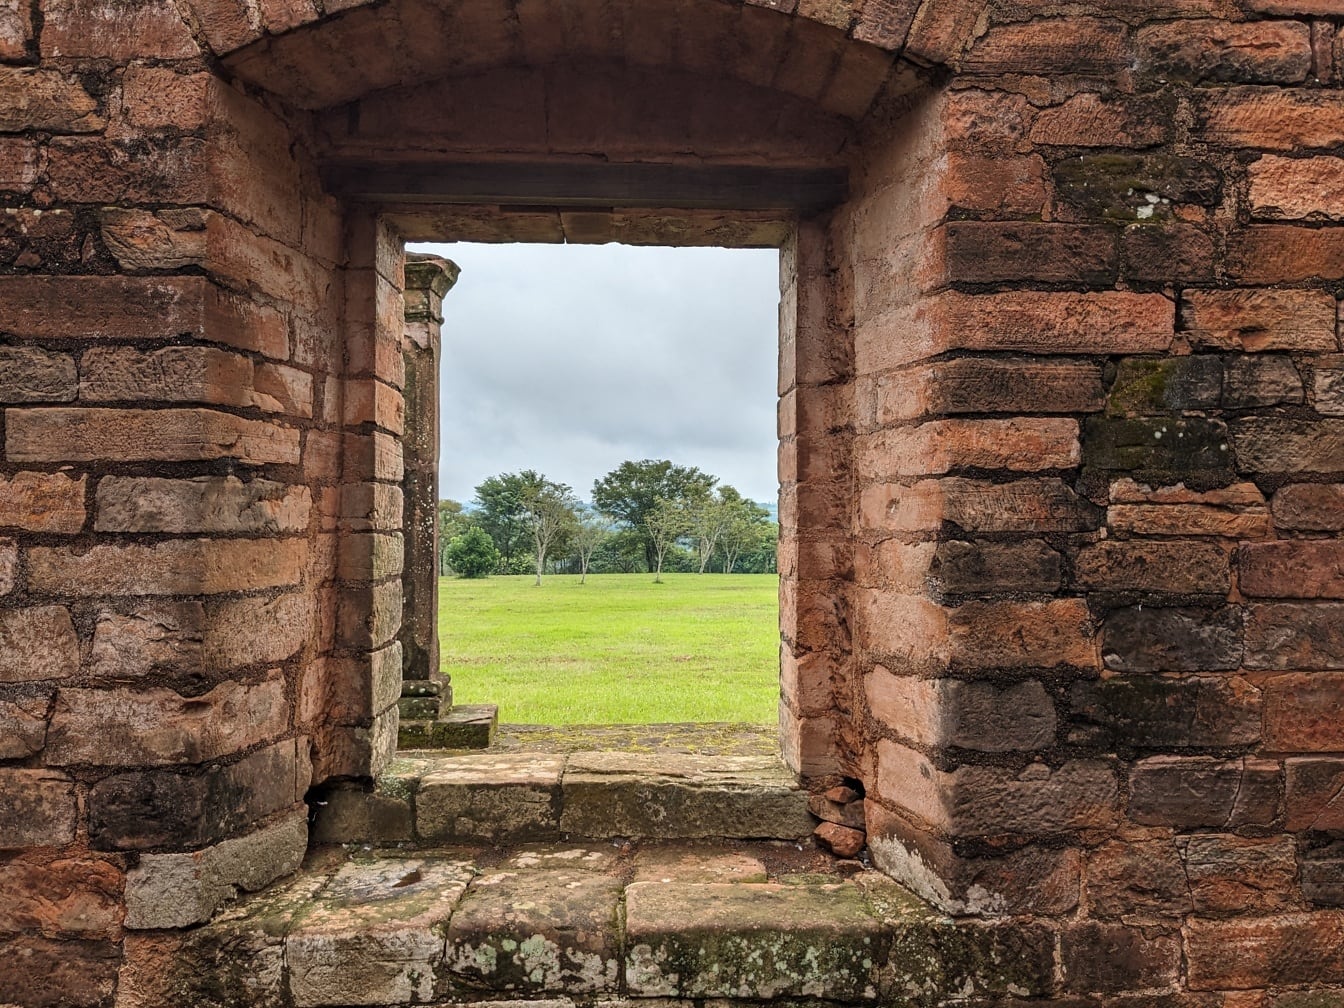 A medieval window on a brick wall in the Jesuit mission, an archeological site in Paraguay